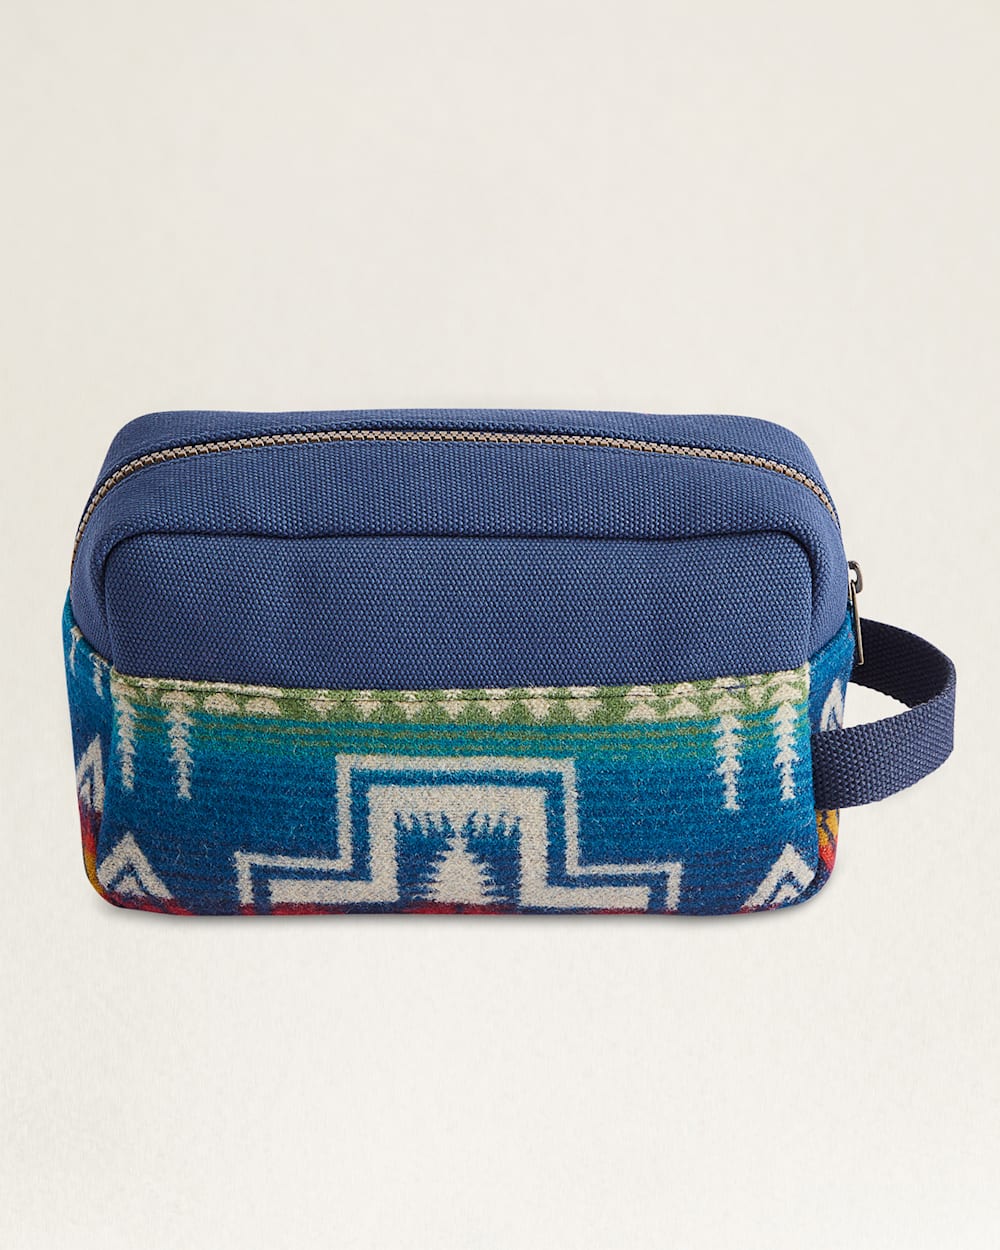 ALTERNATE VIEW OF LIMITED EDITION HARDING CARRYALL POUCH IN ROYAL BLUE image number 2